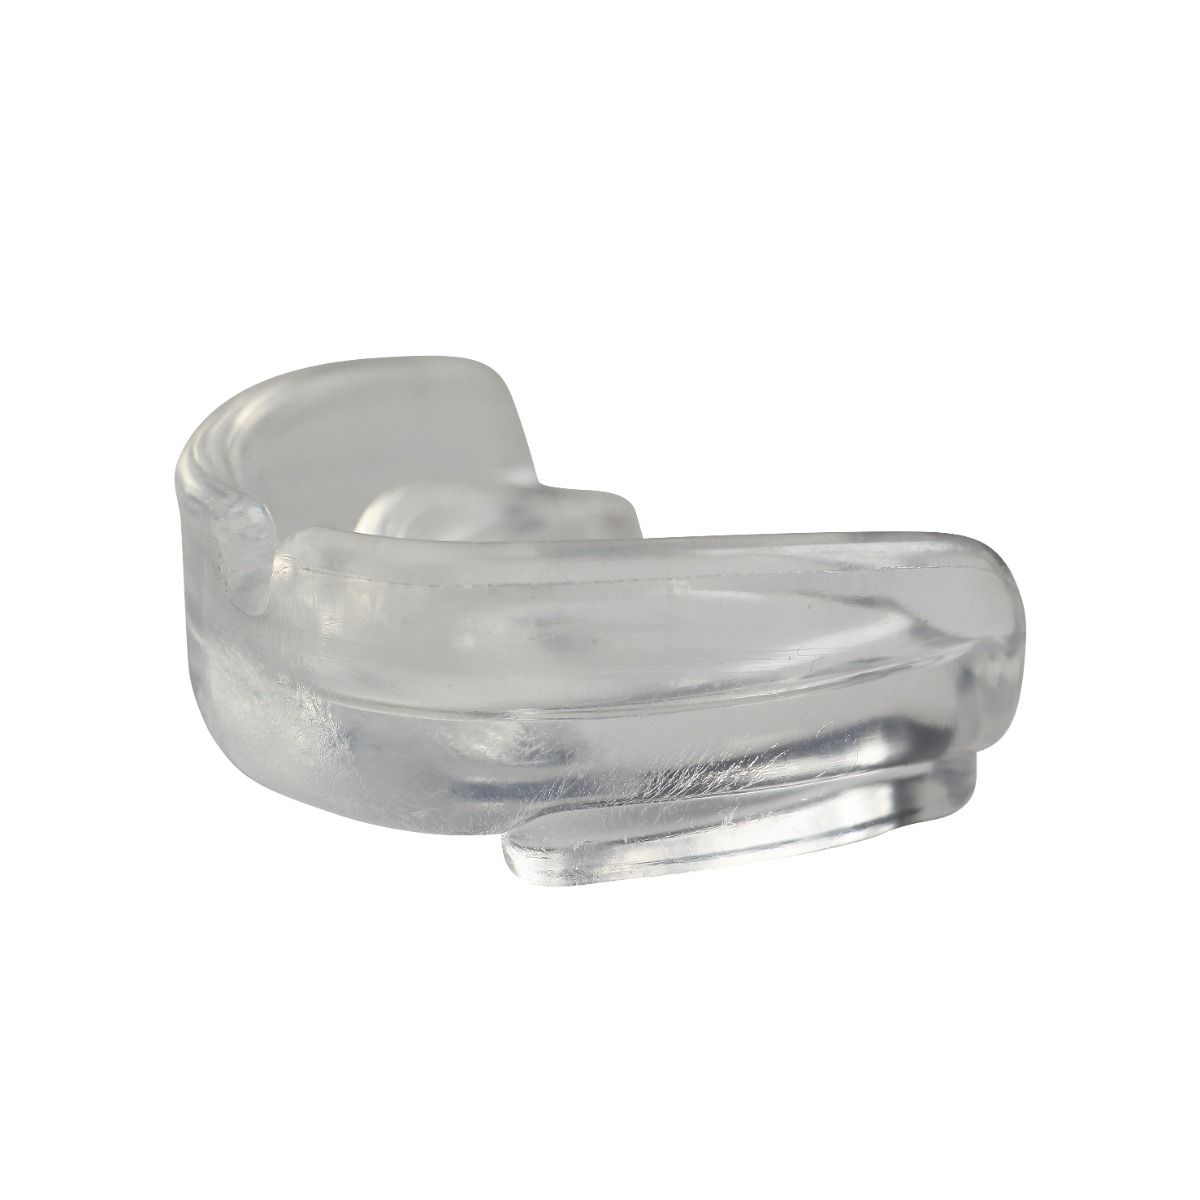 Adidas Double Mouth Guard